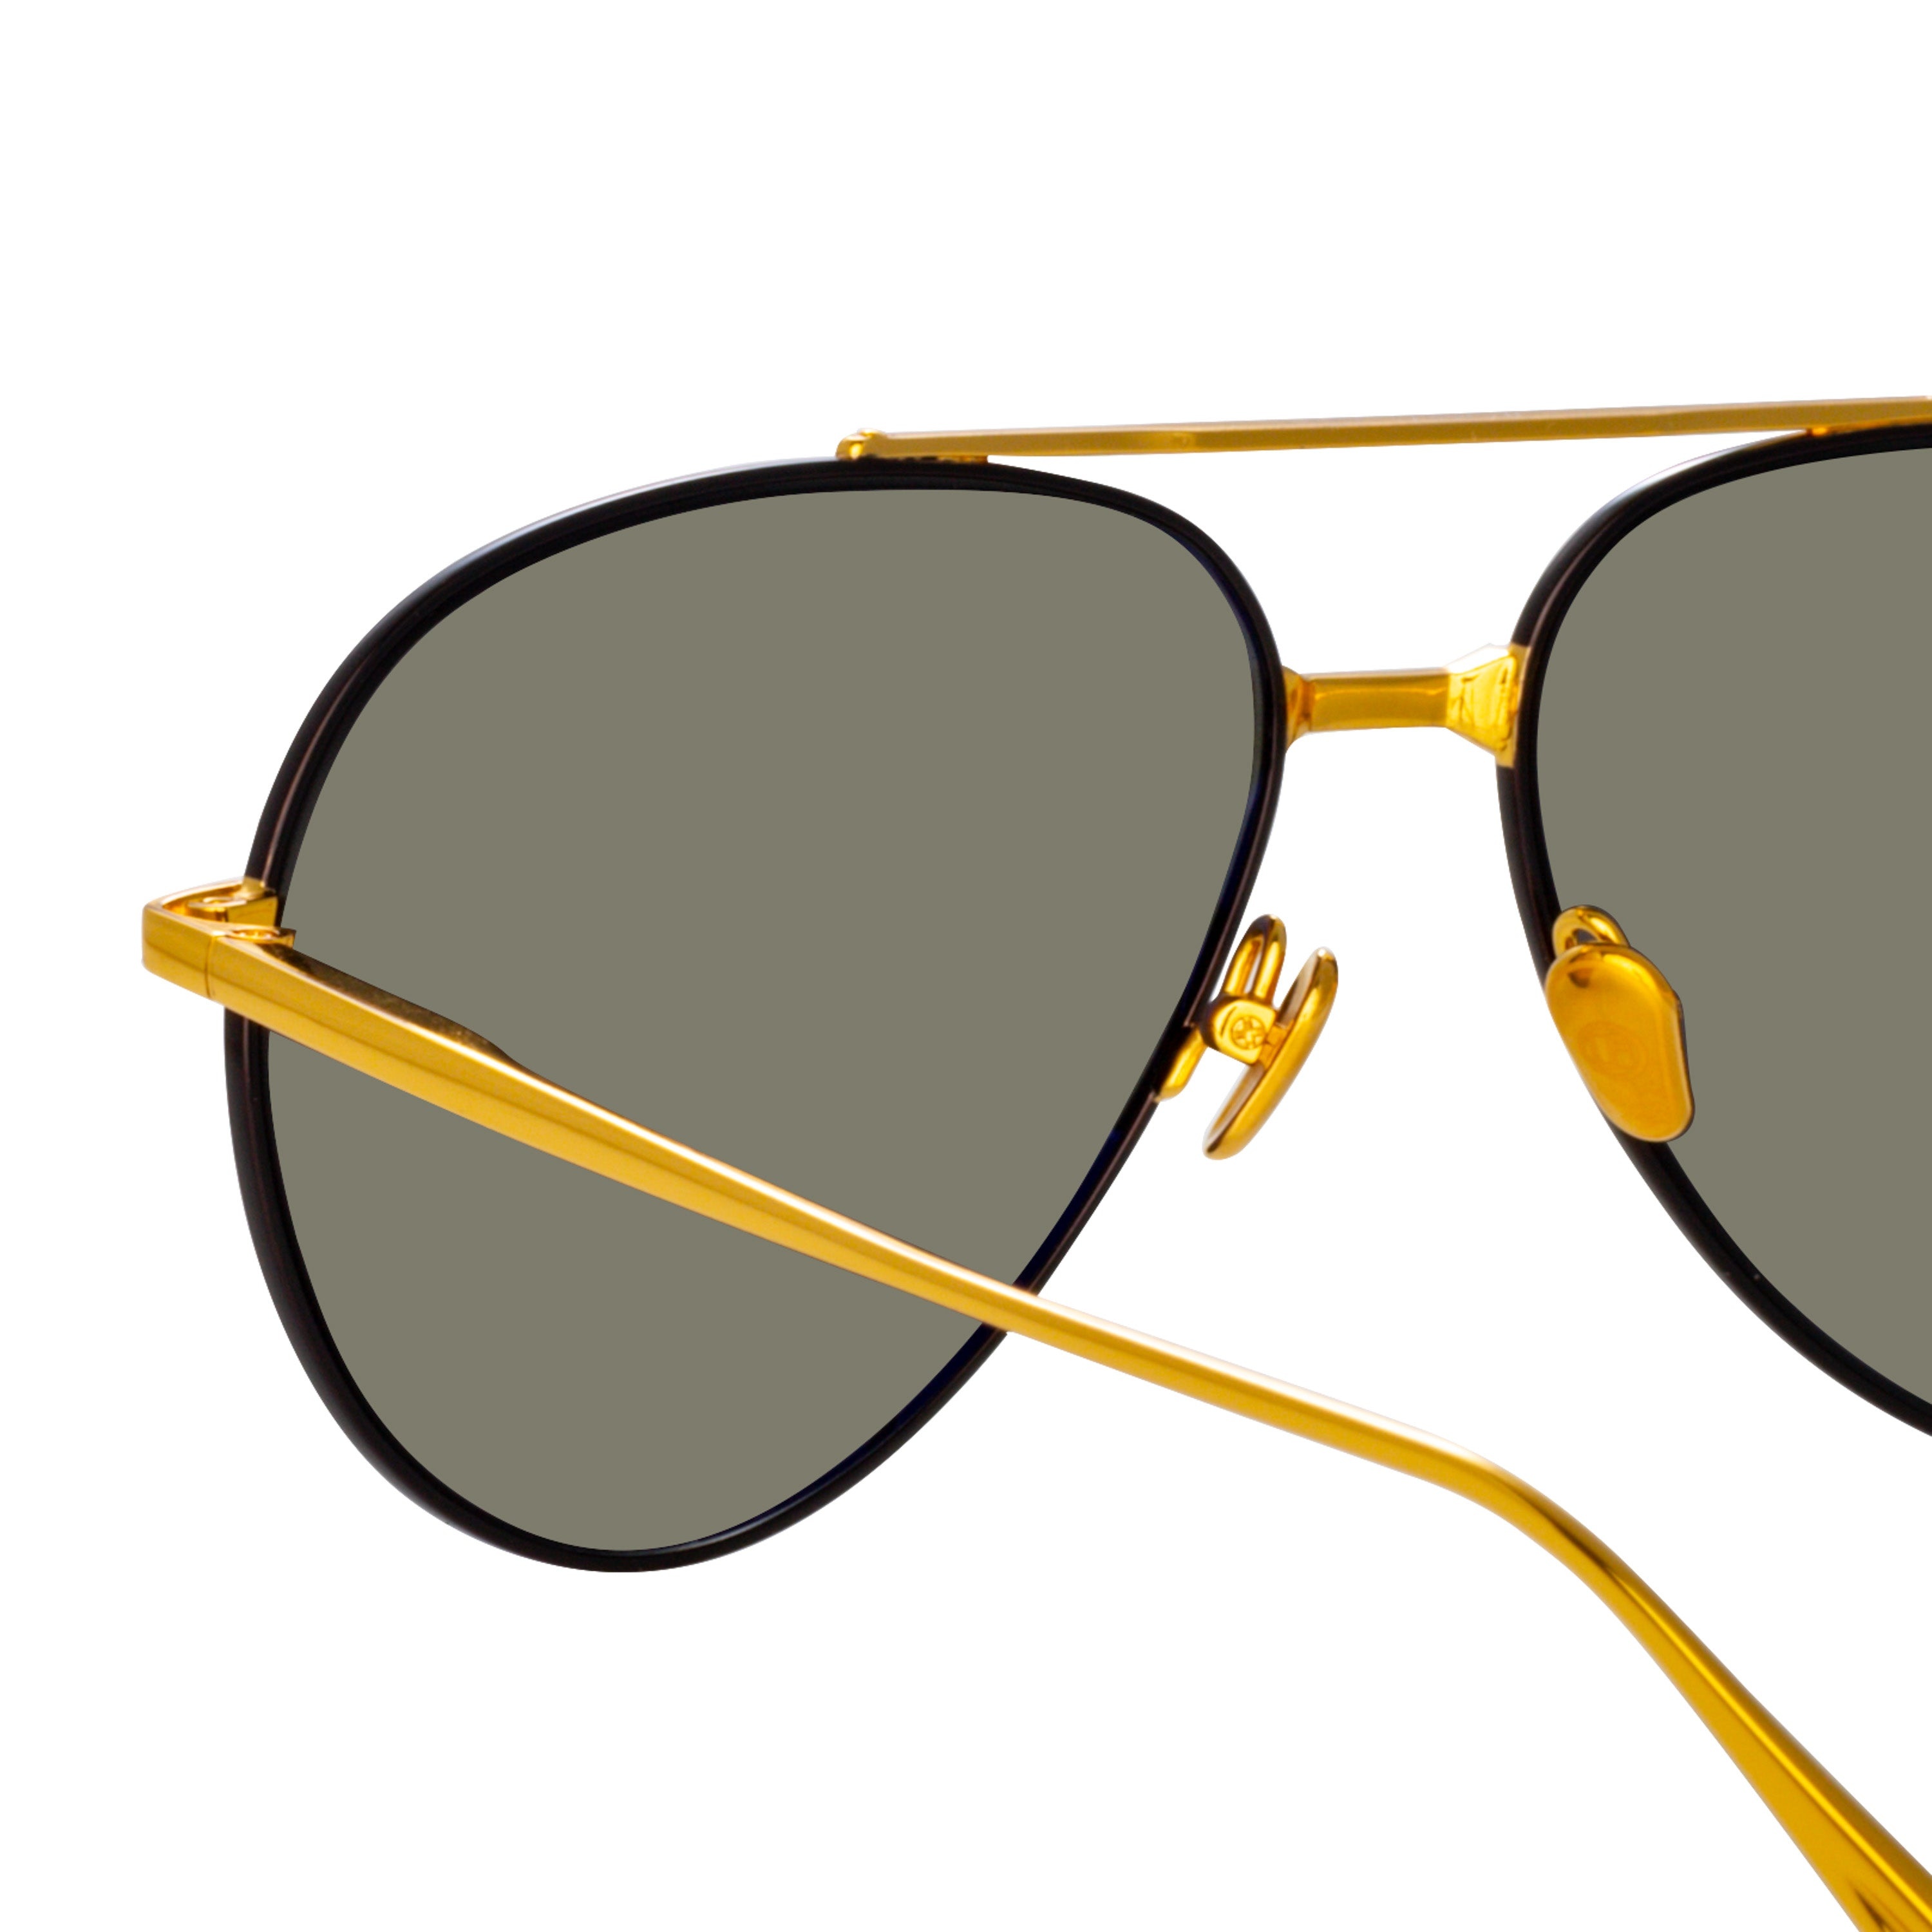 MARCELO AVIATOR SUNGLASSES IN BLACK AND YELLOW GOLD - 6